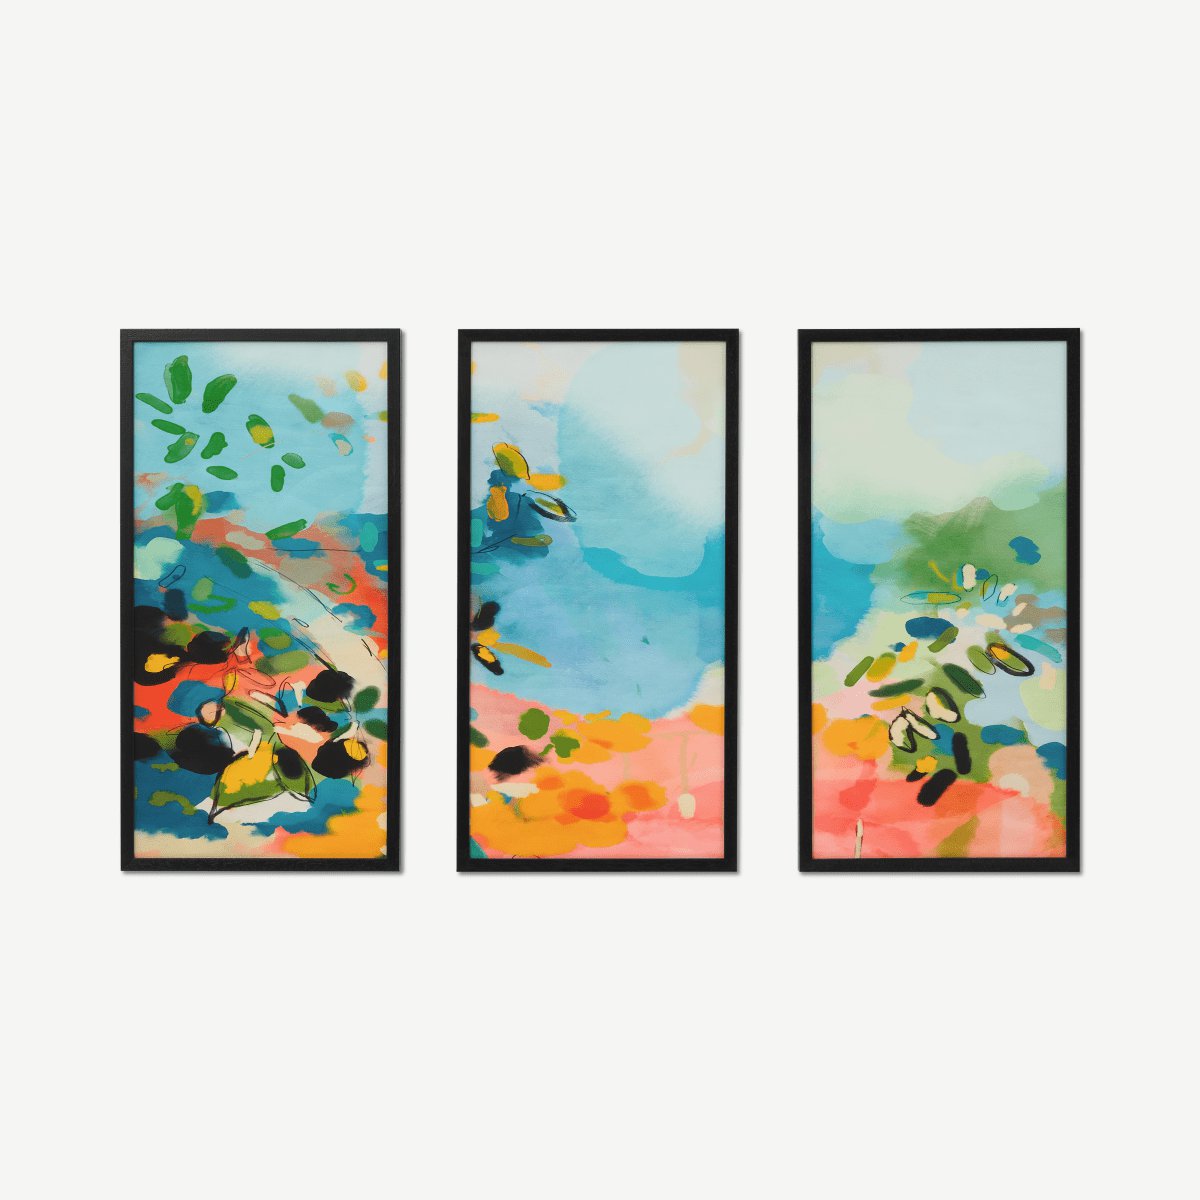 Ana Rut Bre, 'Garden with Sea View' Set of 3 Framed Prints, 30 x 60cm